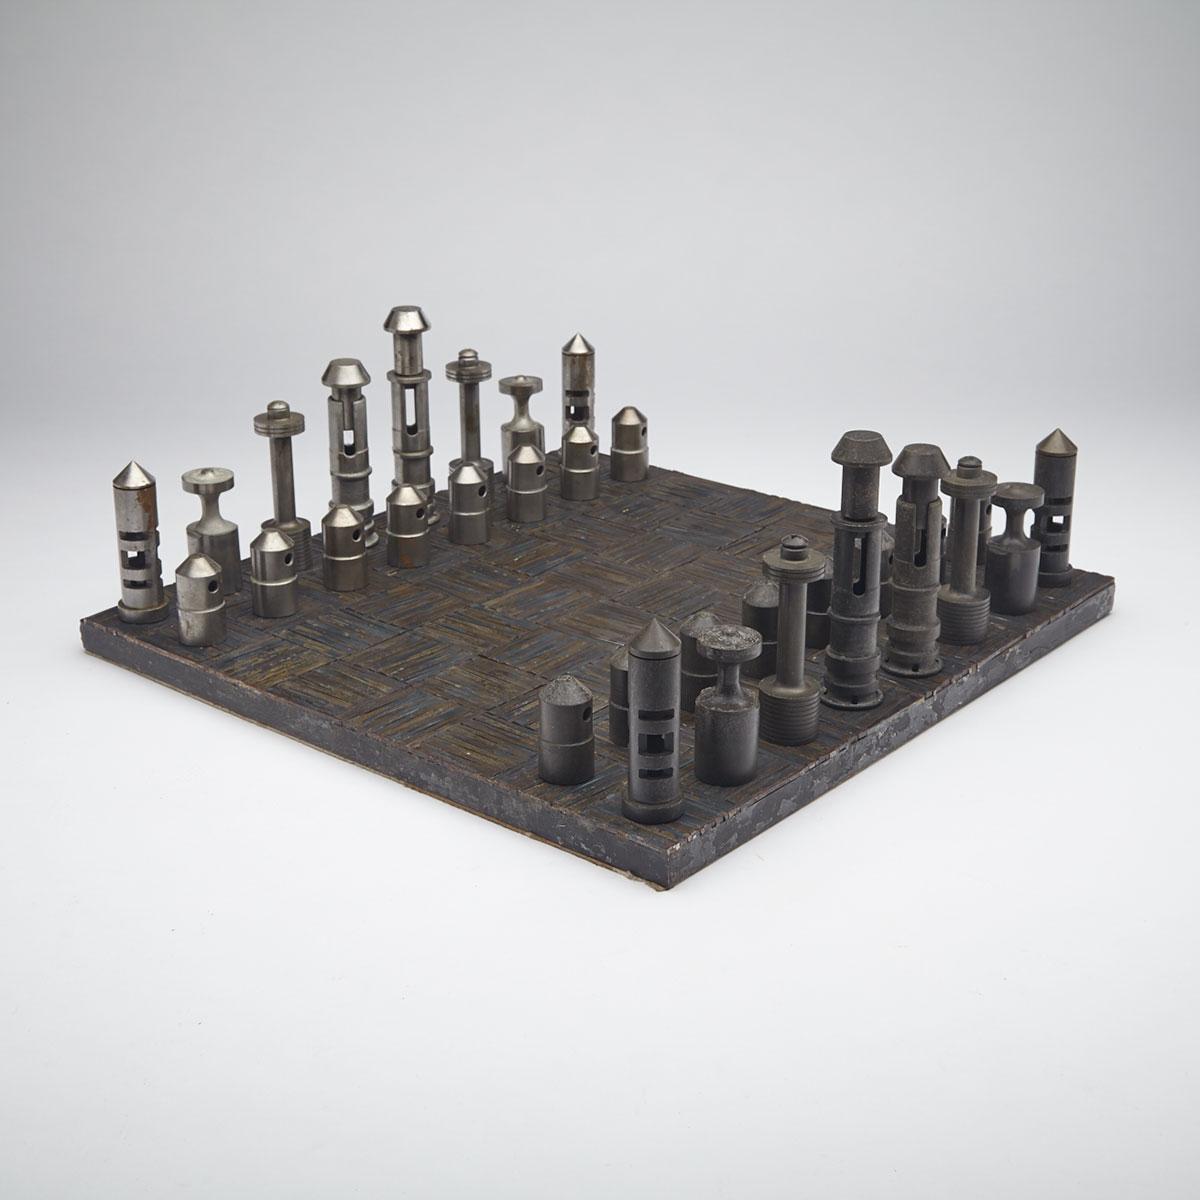 Munitions Parts Chess Set and Board, mid 20th century